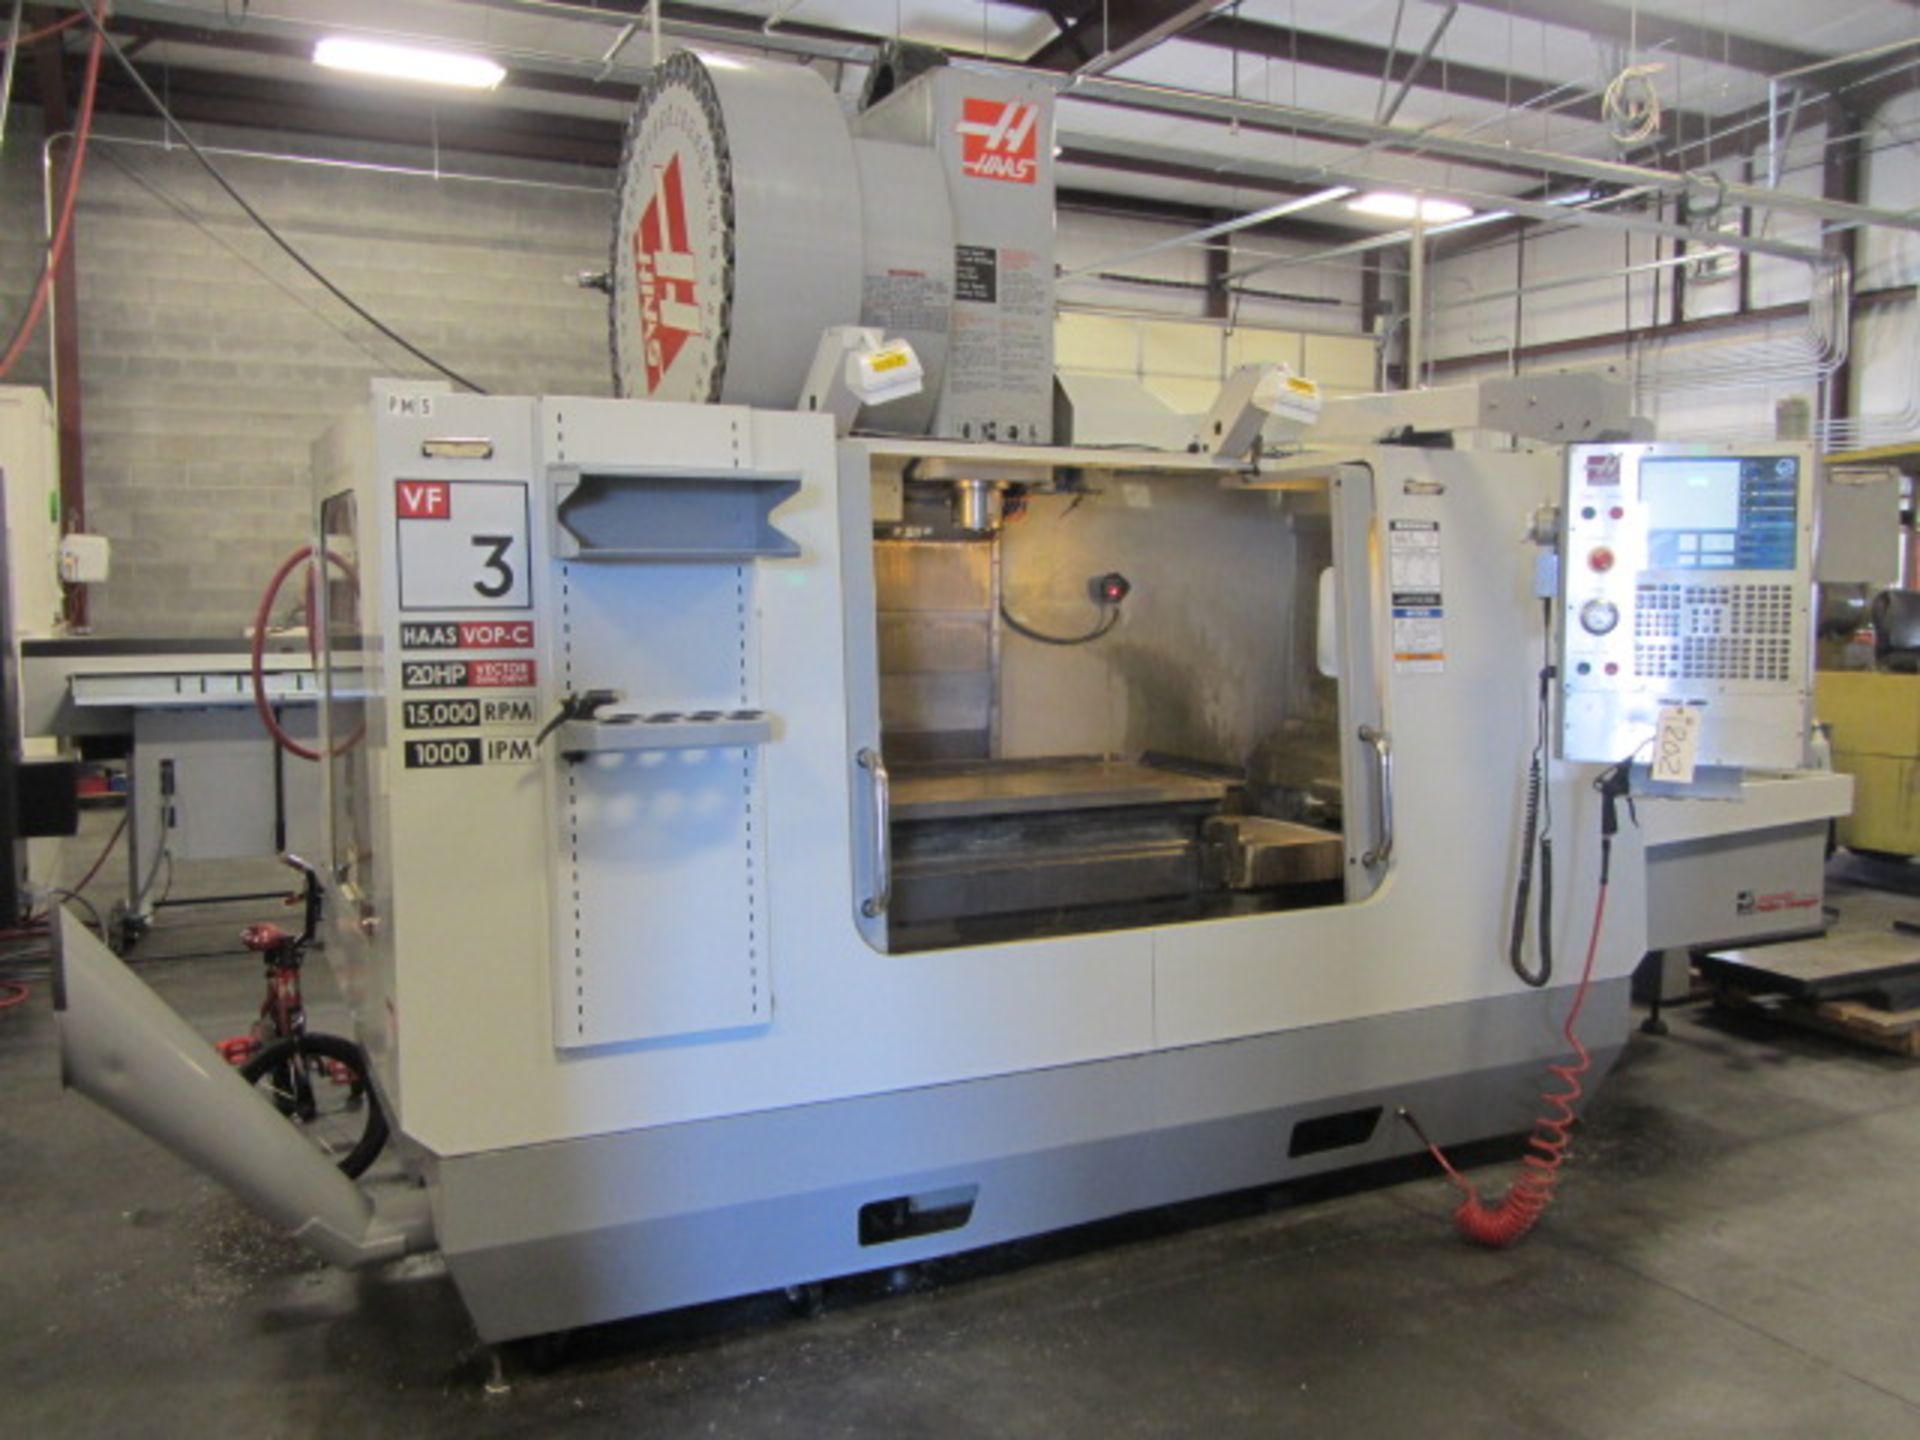 Haas VF3DAPC 4-Axis CNC Vertical Machining Center with Dual Pallet Changer, Intuitive Probing, - Image 2 of 10